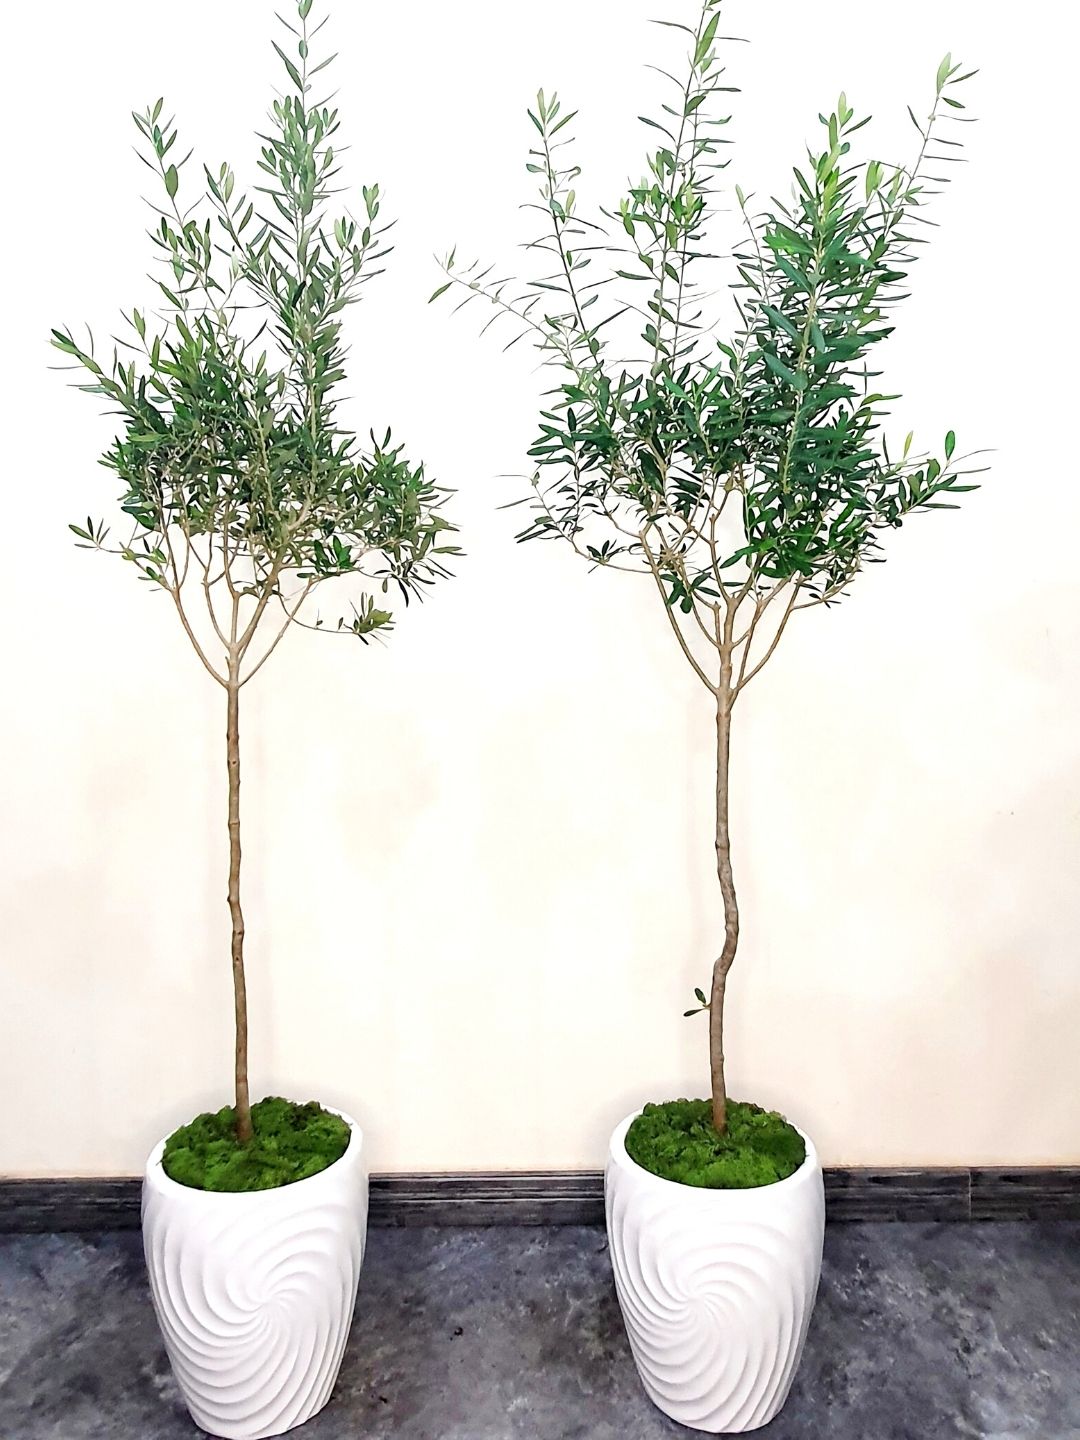 Sleek Stem XL Indoor Olive Tree: Resilience in a Stylish Ceramic Pot